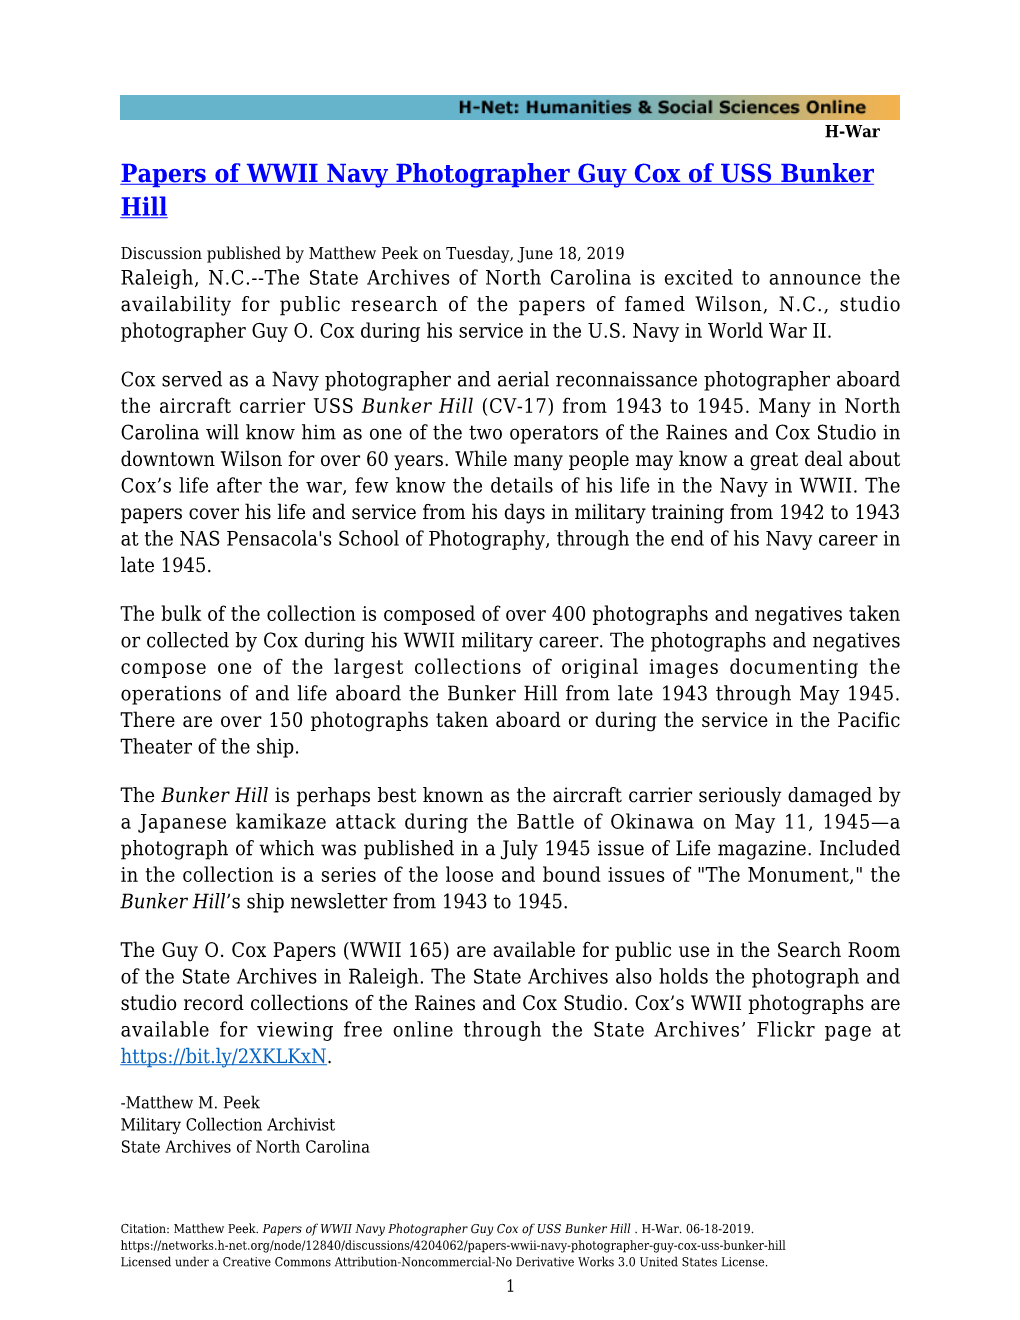 Papers of WWII Navy Photographer Guy Cox of USS Bunker Hill